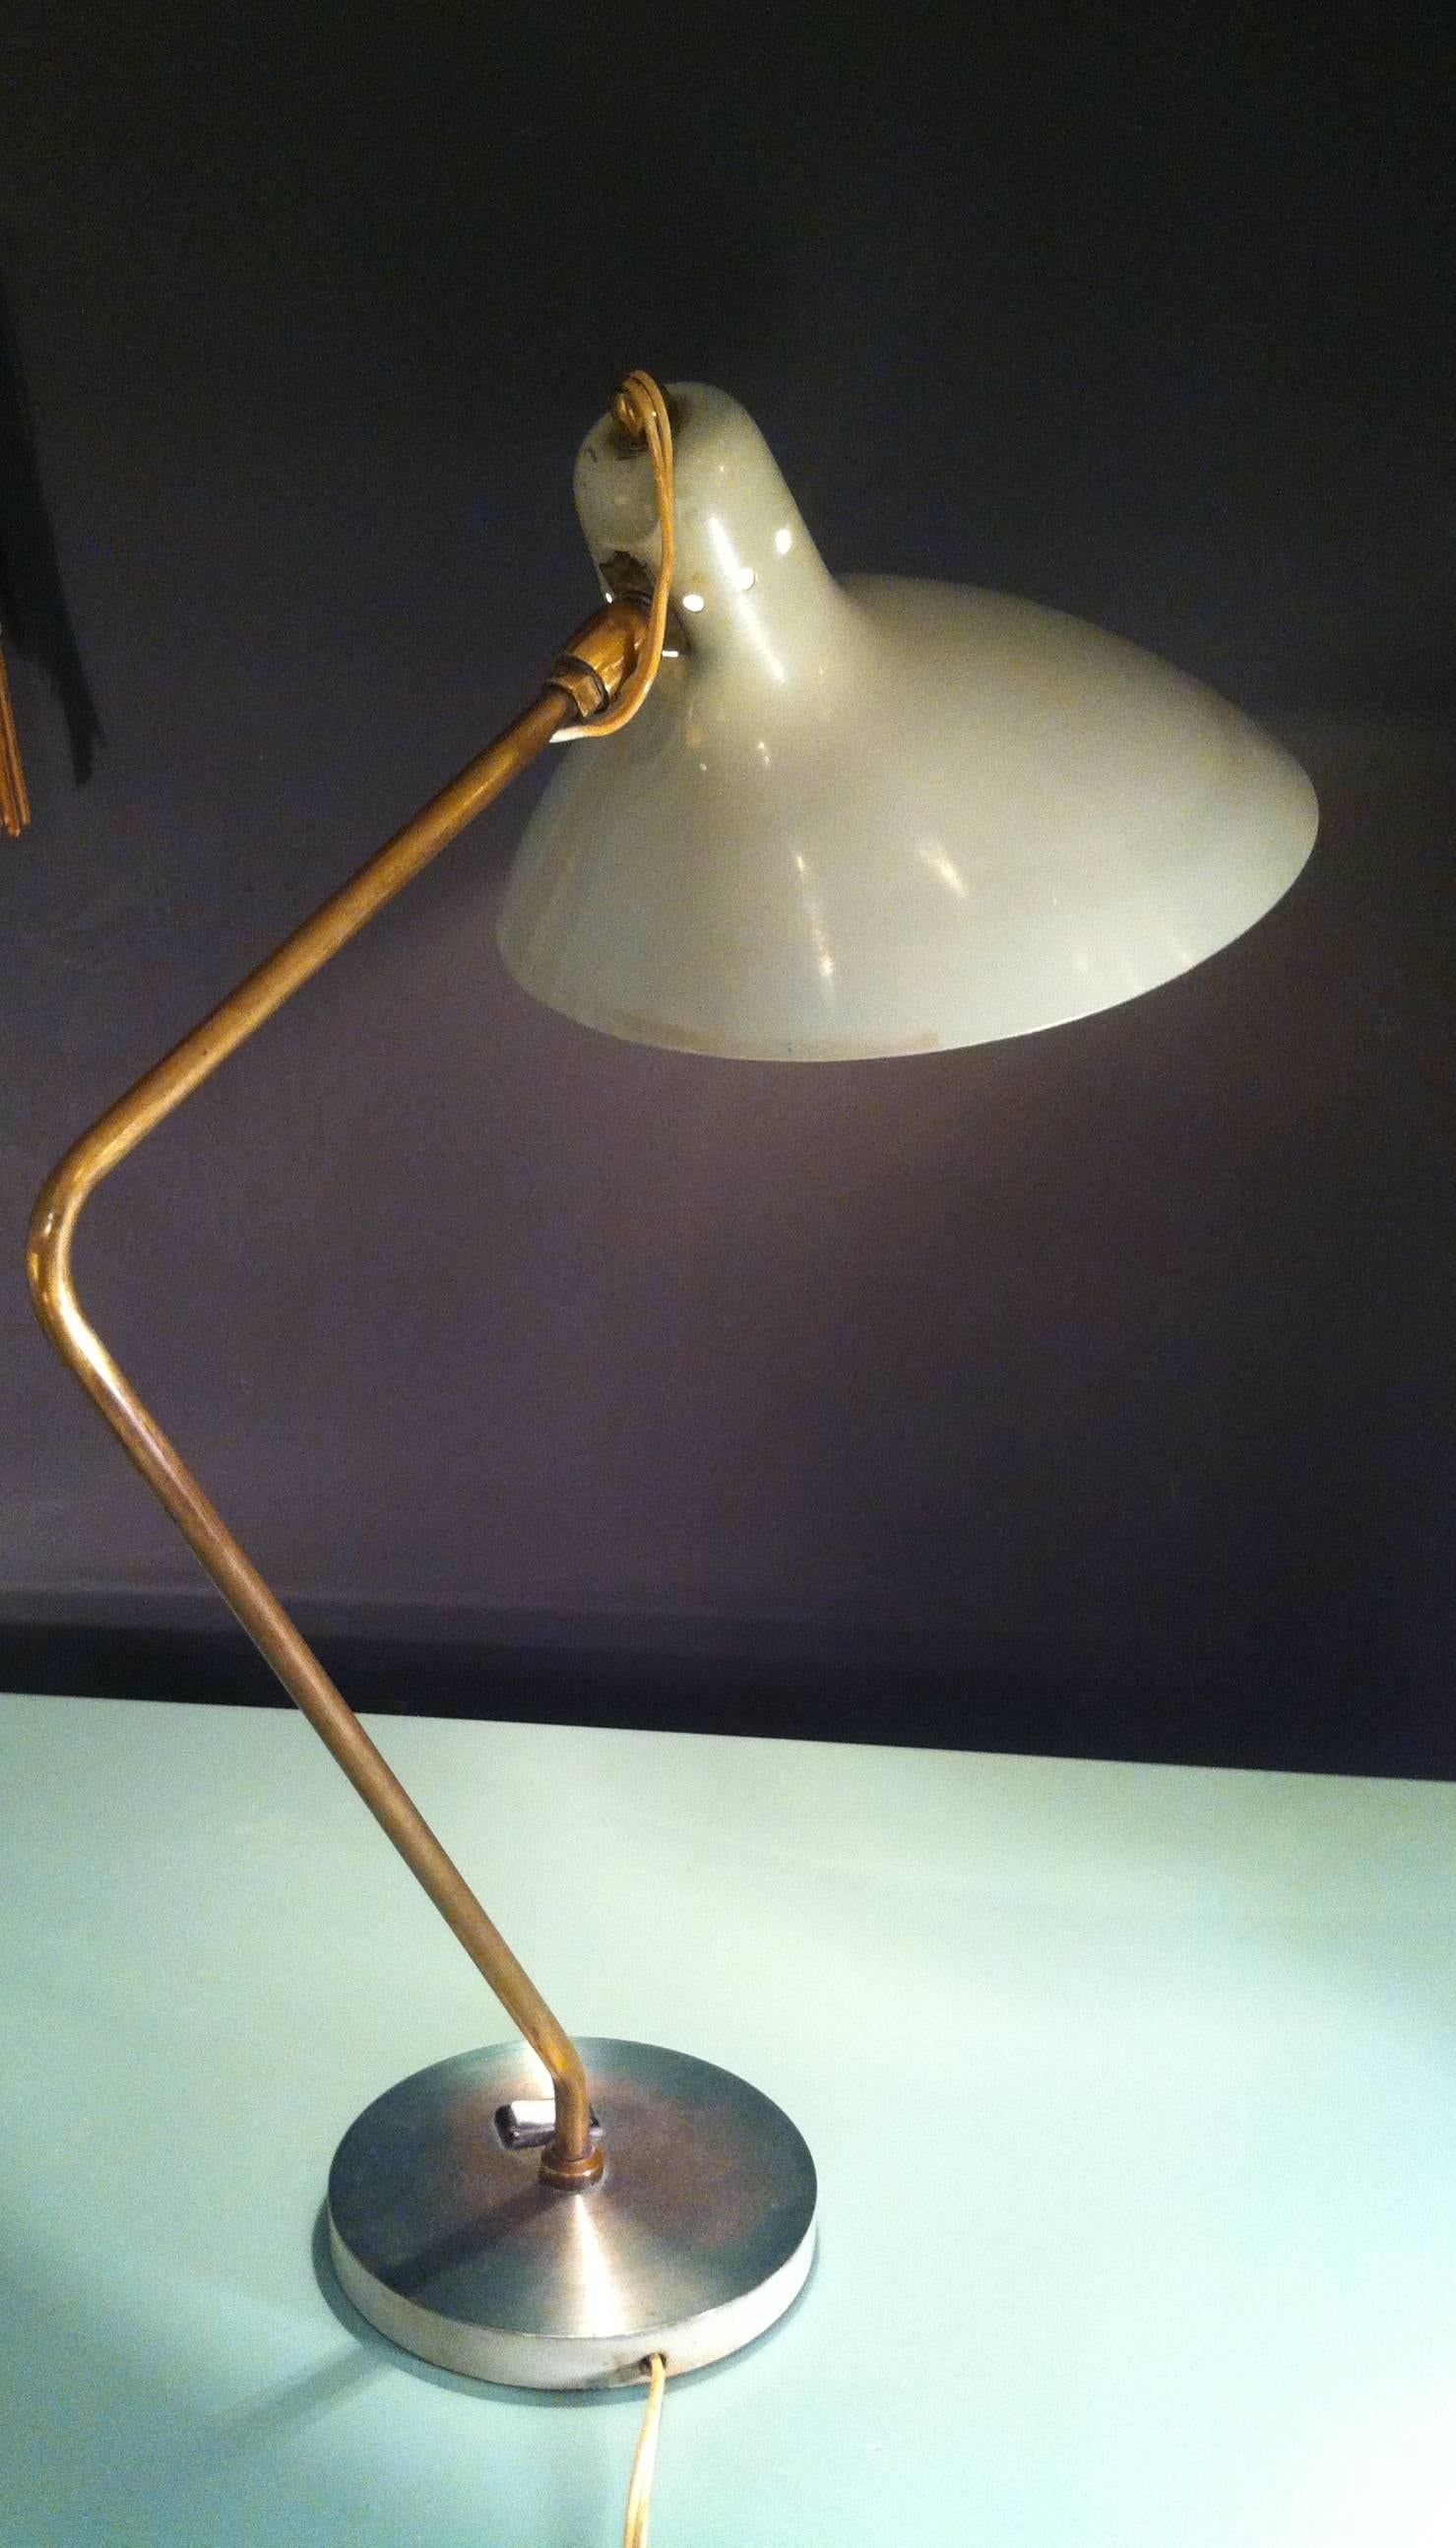 French 1950 table lamp by Boris Lacroix.
Very light green metal and brass.
Chromed base with a switch.
Good original condition. A small dent of 1 mm on the shade.
Measures: Height 50 cm x width 24 cm x depth 44 cm.
 